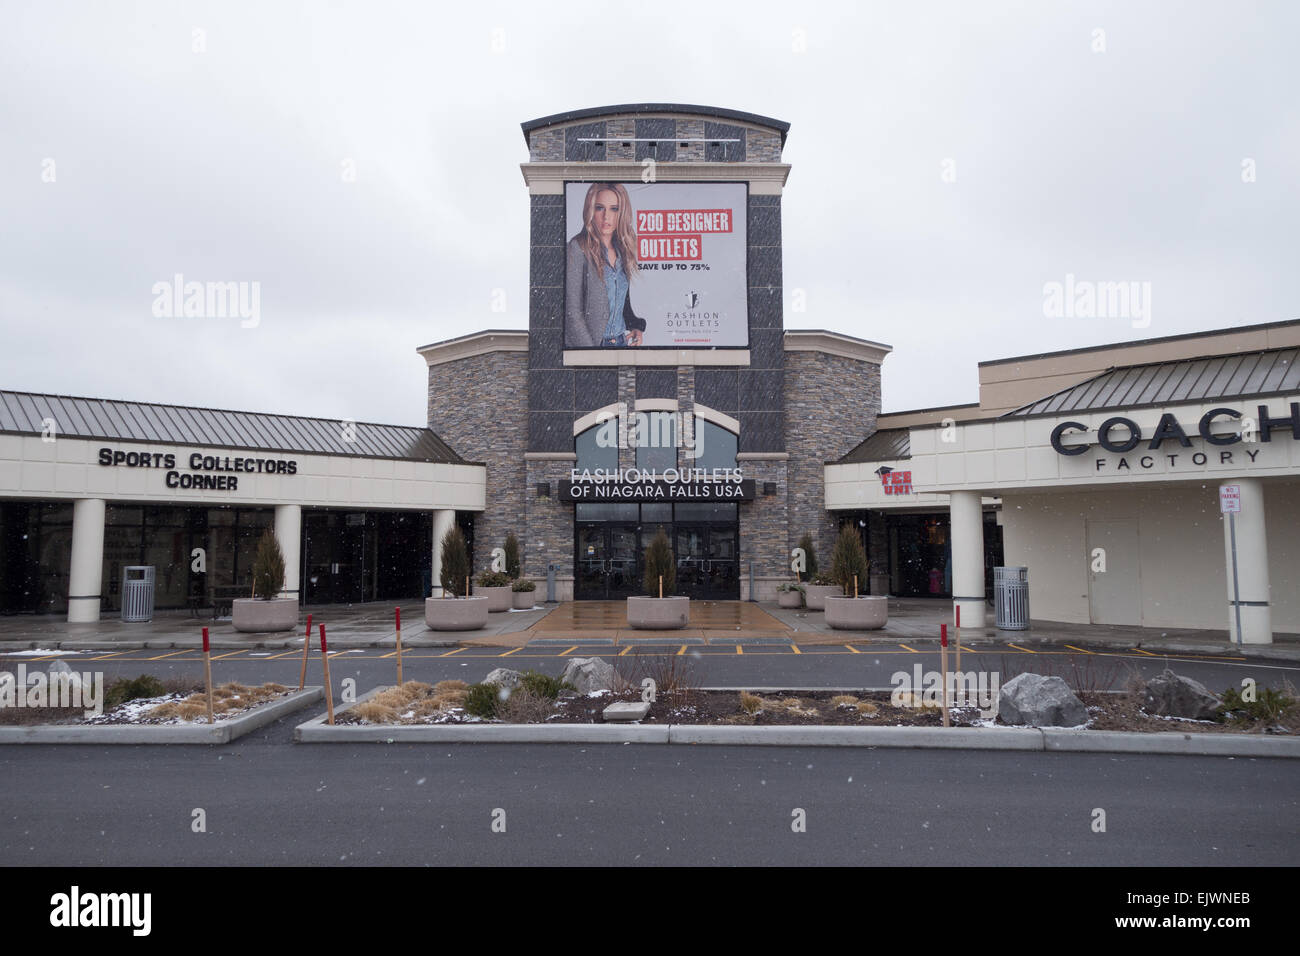 Fashion Outlets Of Niagara Falls High Resolution Stock Photography and  Images - Alamy